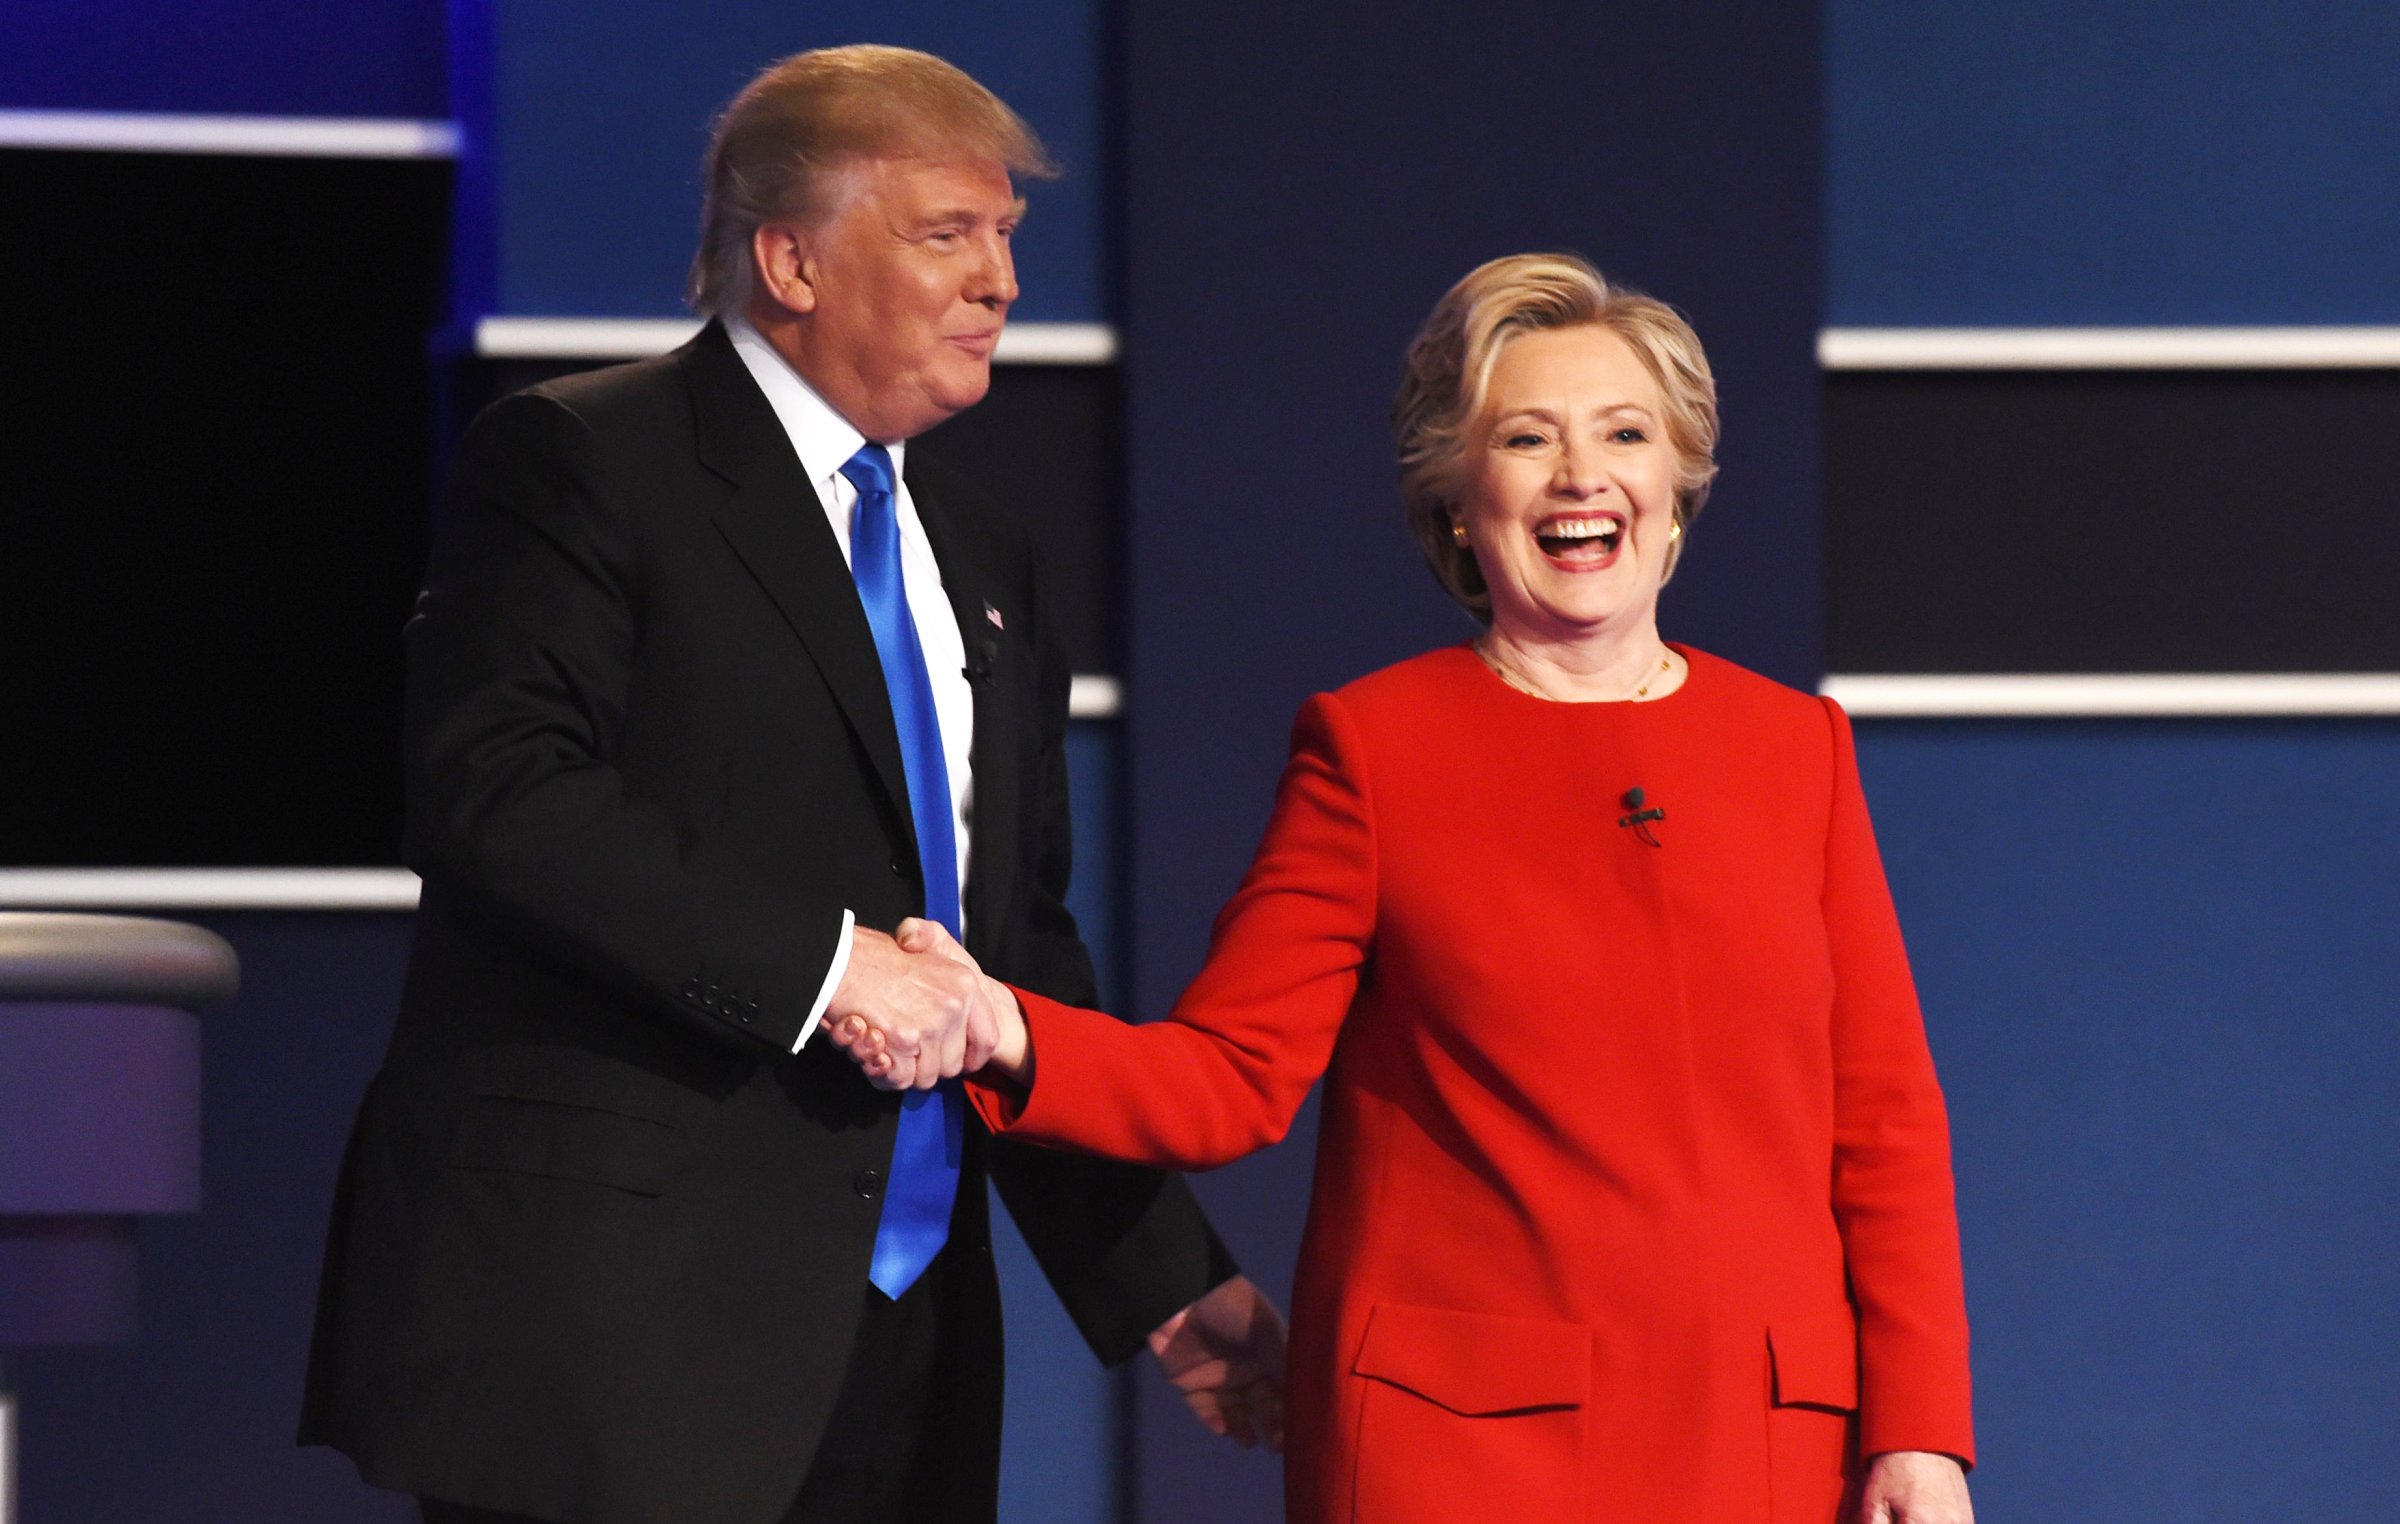 Donald Trump and Hillary Clinton after the first presidential debate at Hofstra University in Hempstead, N.Y., on Sept. 26, 2016.